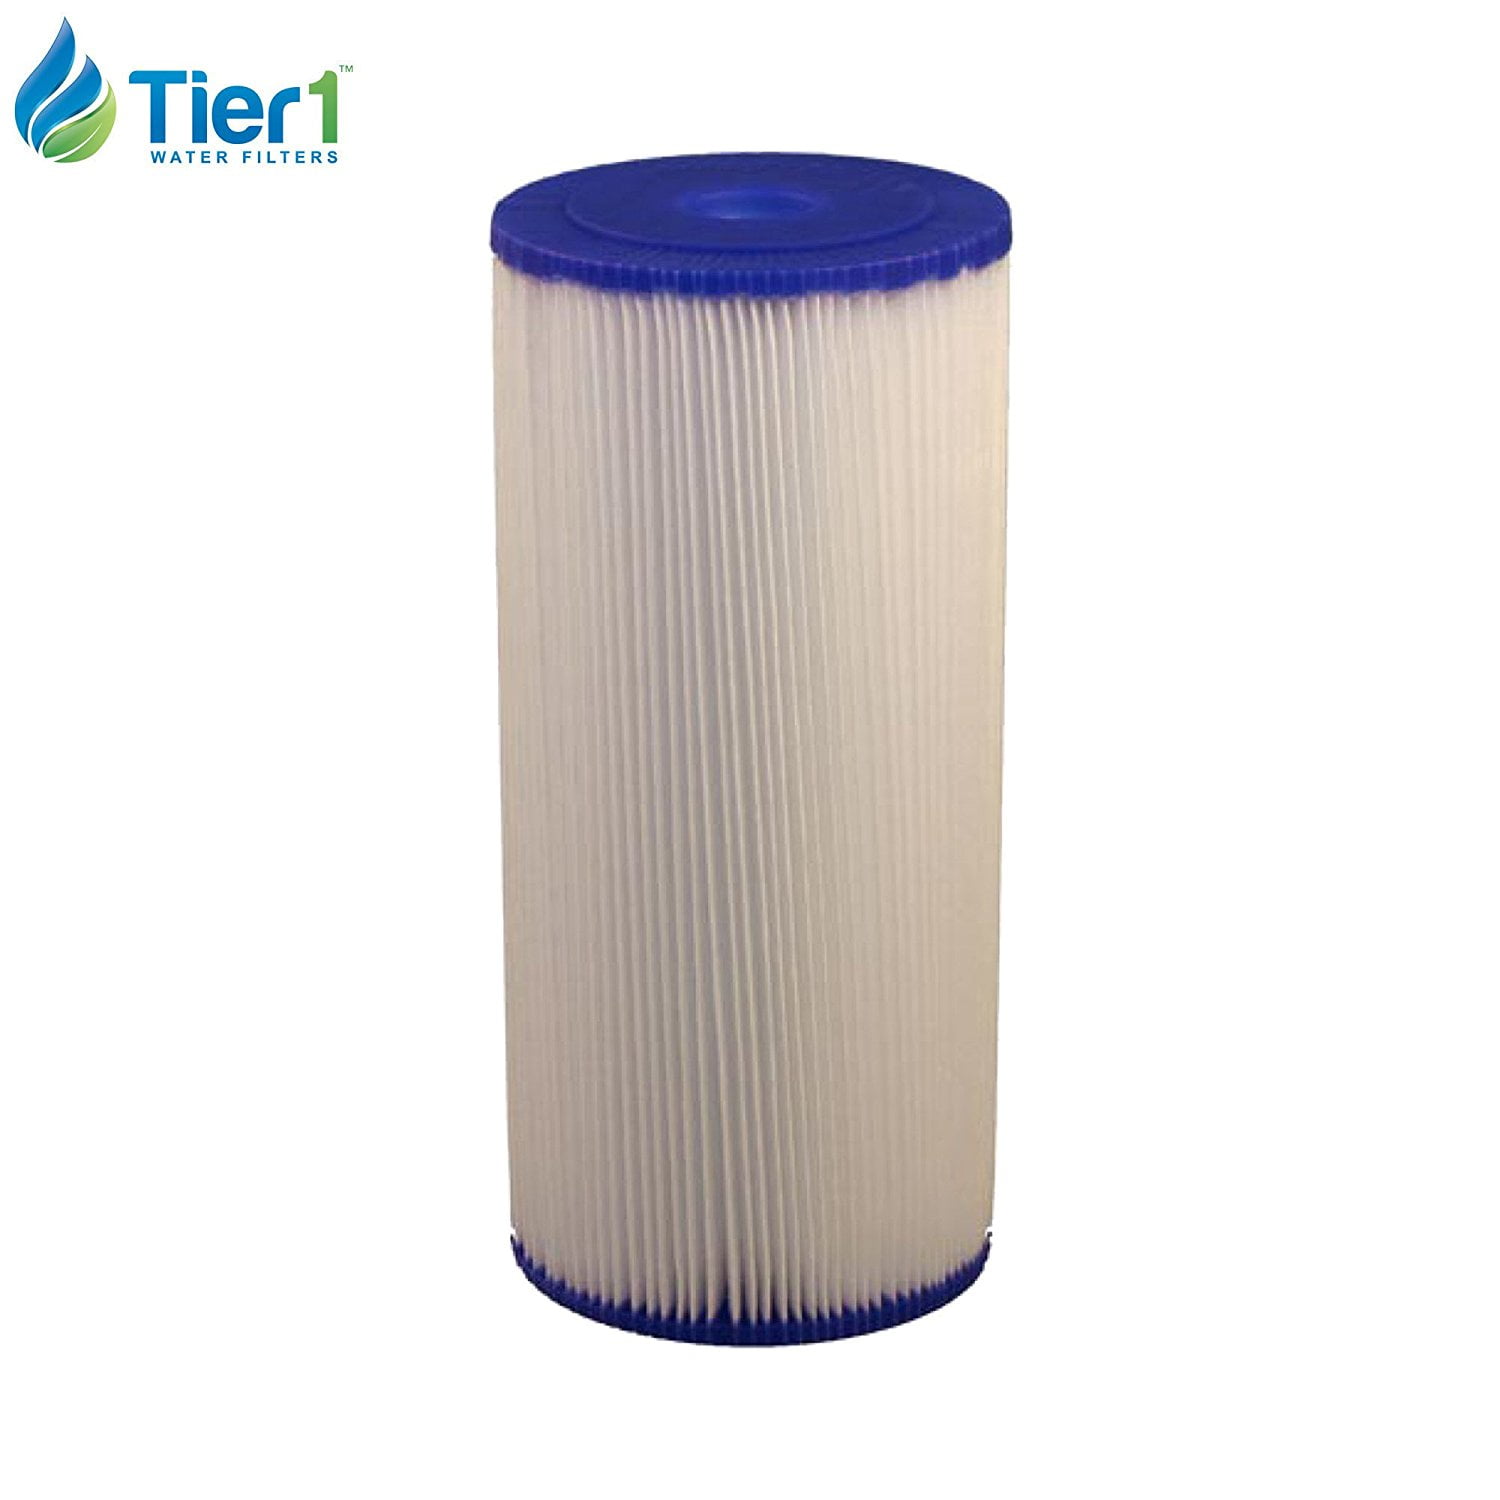 10 x 4.5 Inch 1 Micron SPC-45 Pleated Polyester Sediment Tier1 Water Filter 